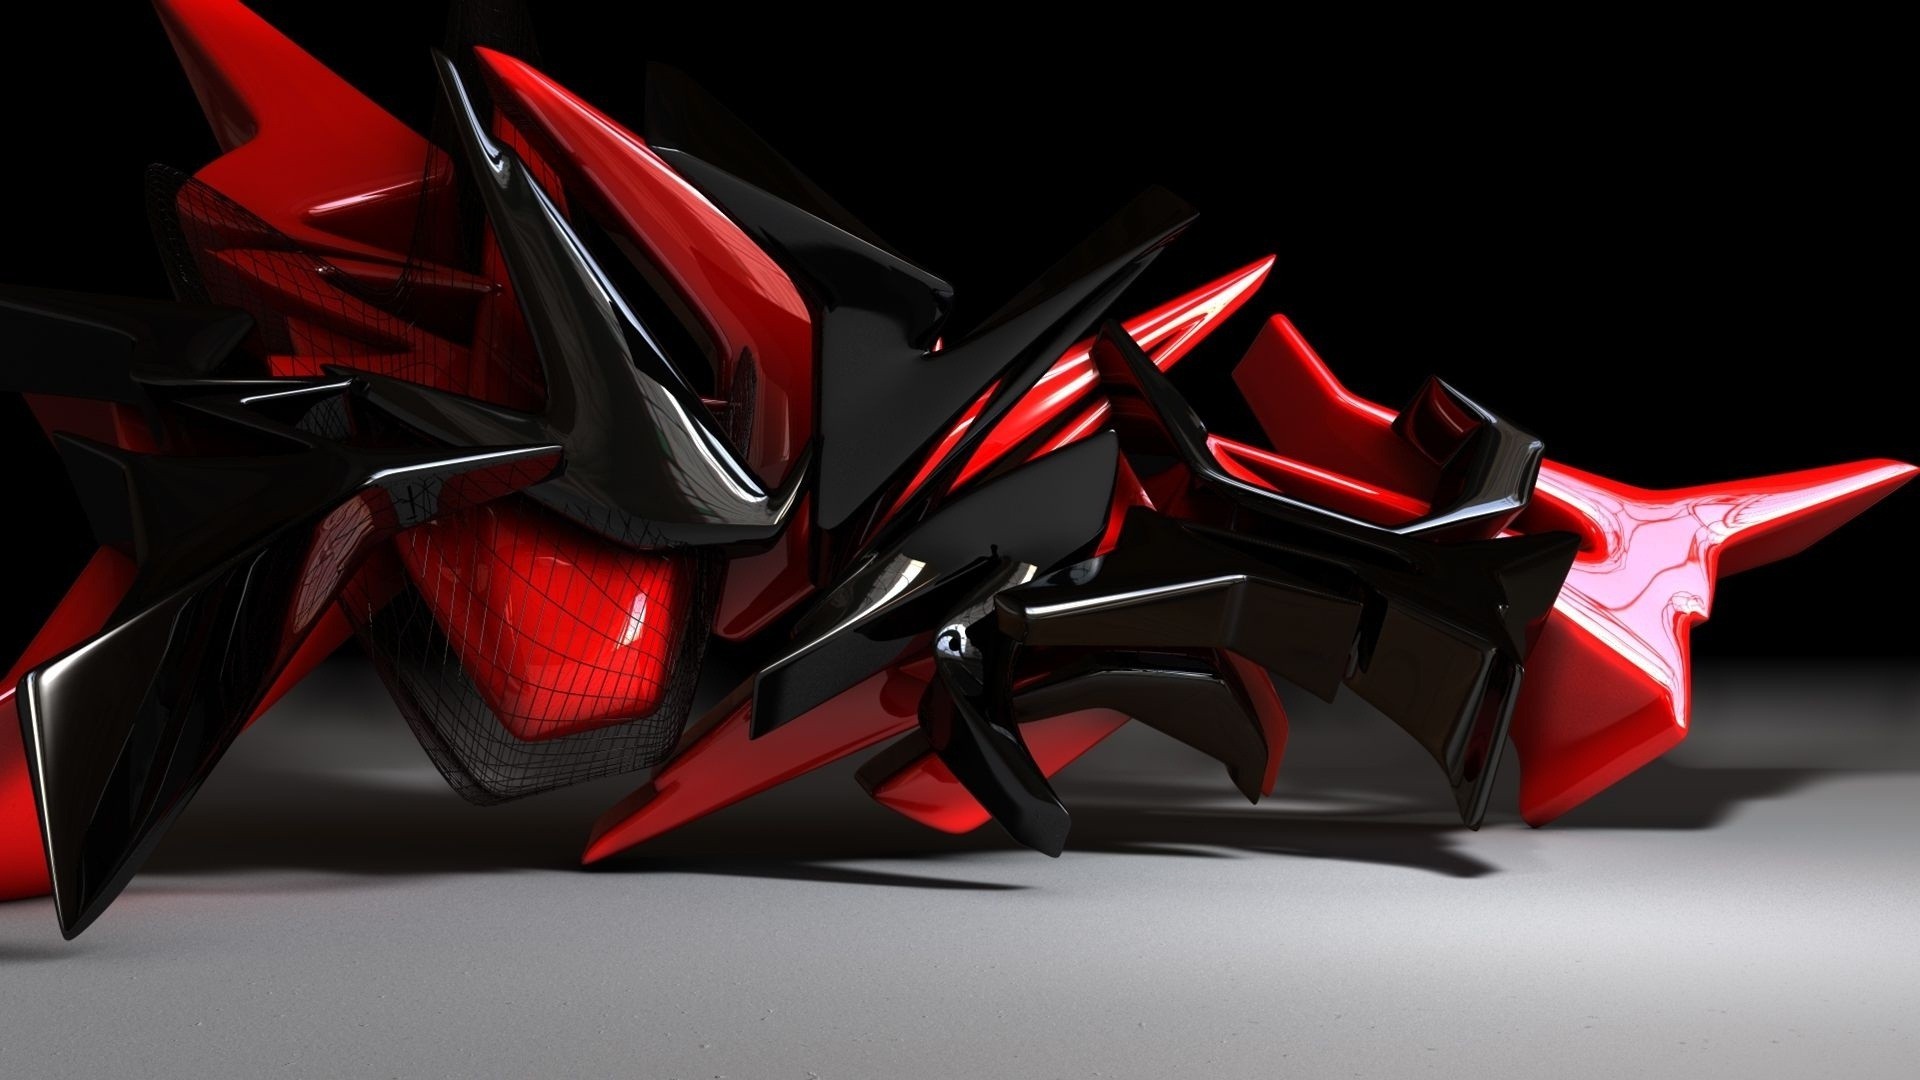 1920x1080 Black and Red 3D Wallpaper 2201